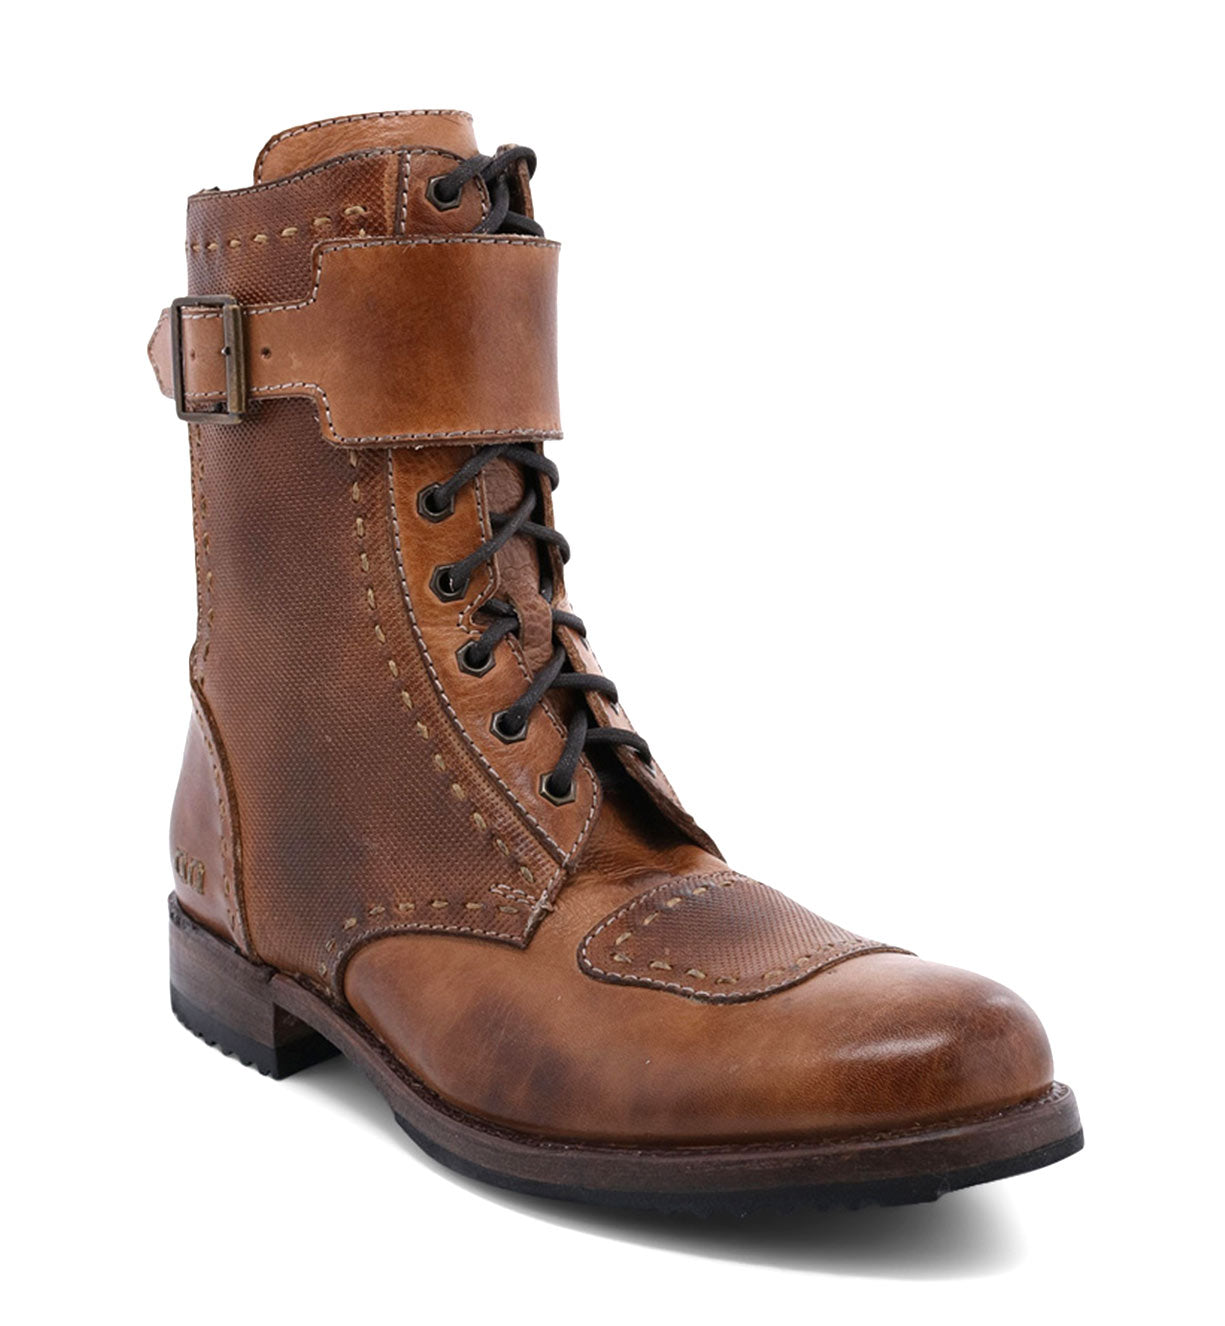 A brown, vegetable tanned leather Walker boot by Bed Stu with a buckle strap at the top, isolated on a white background.